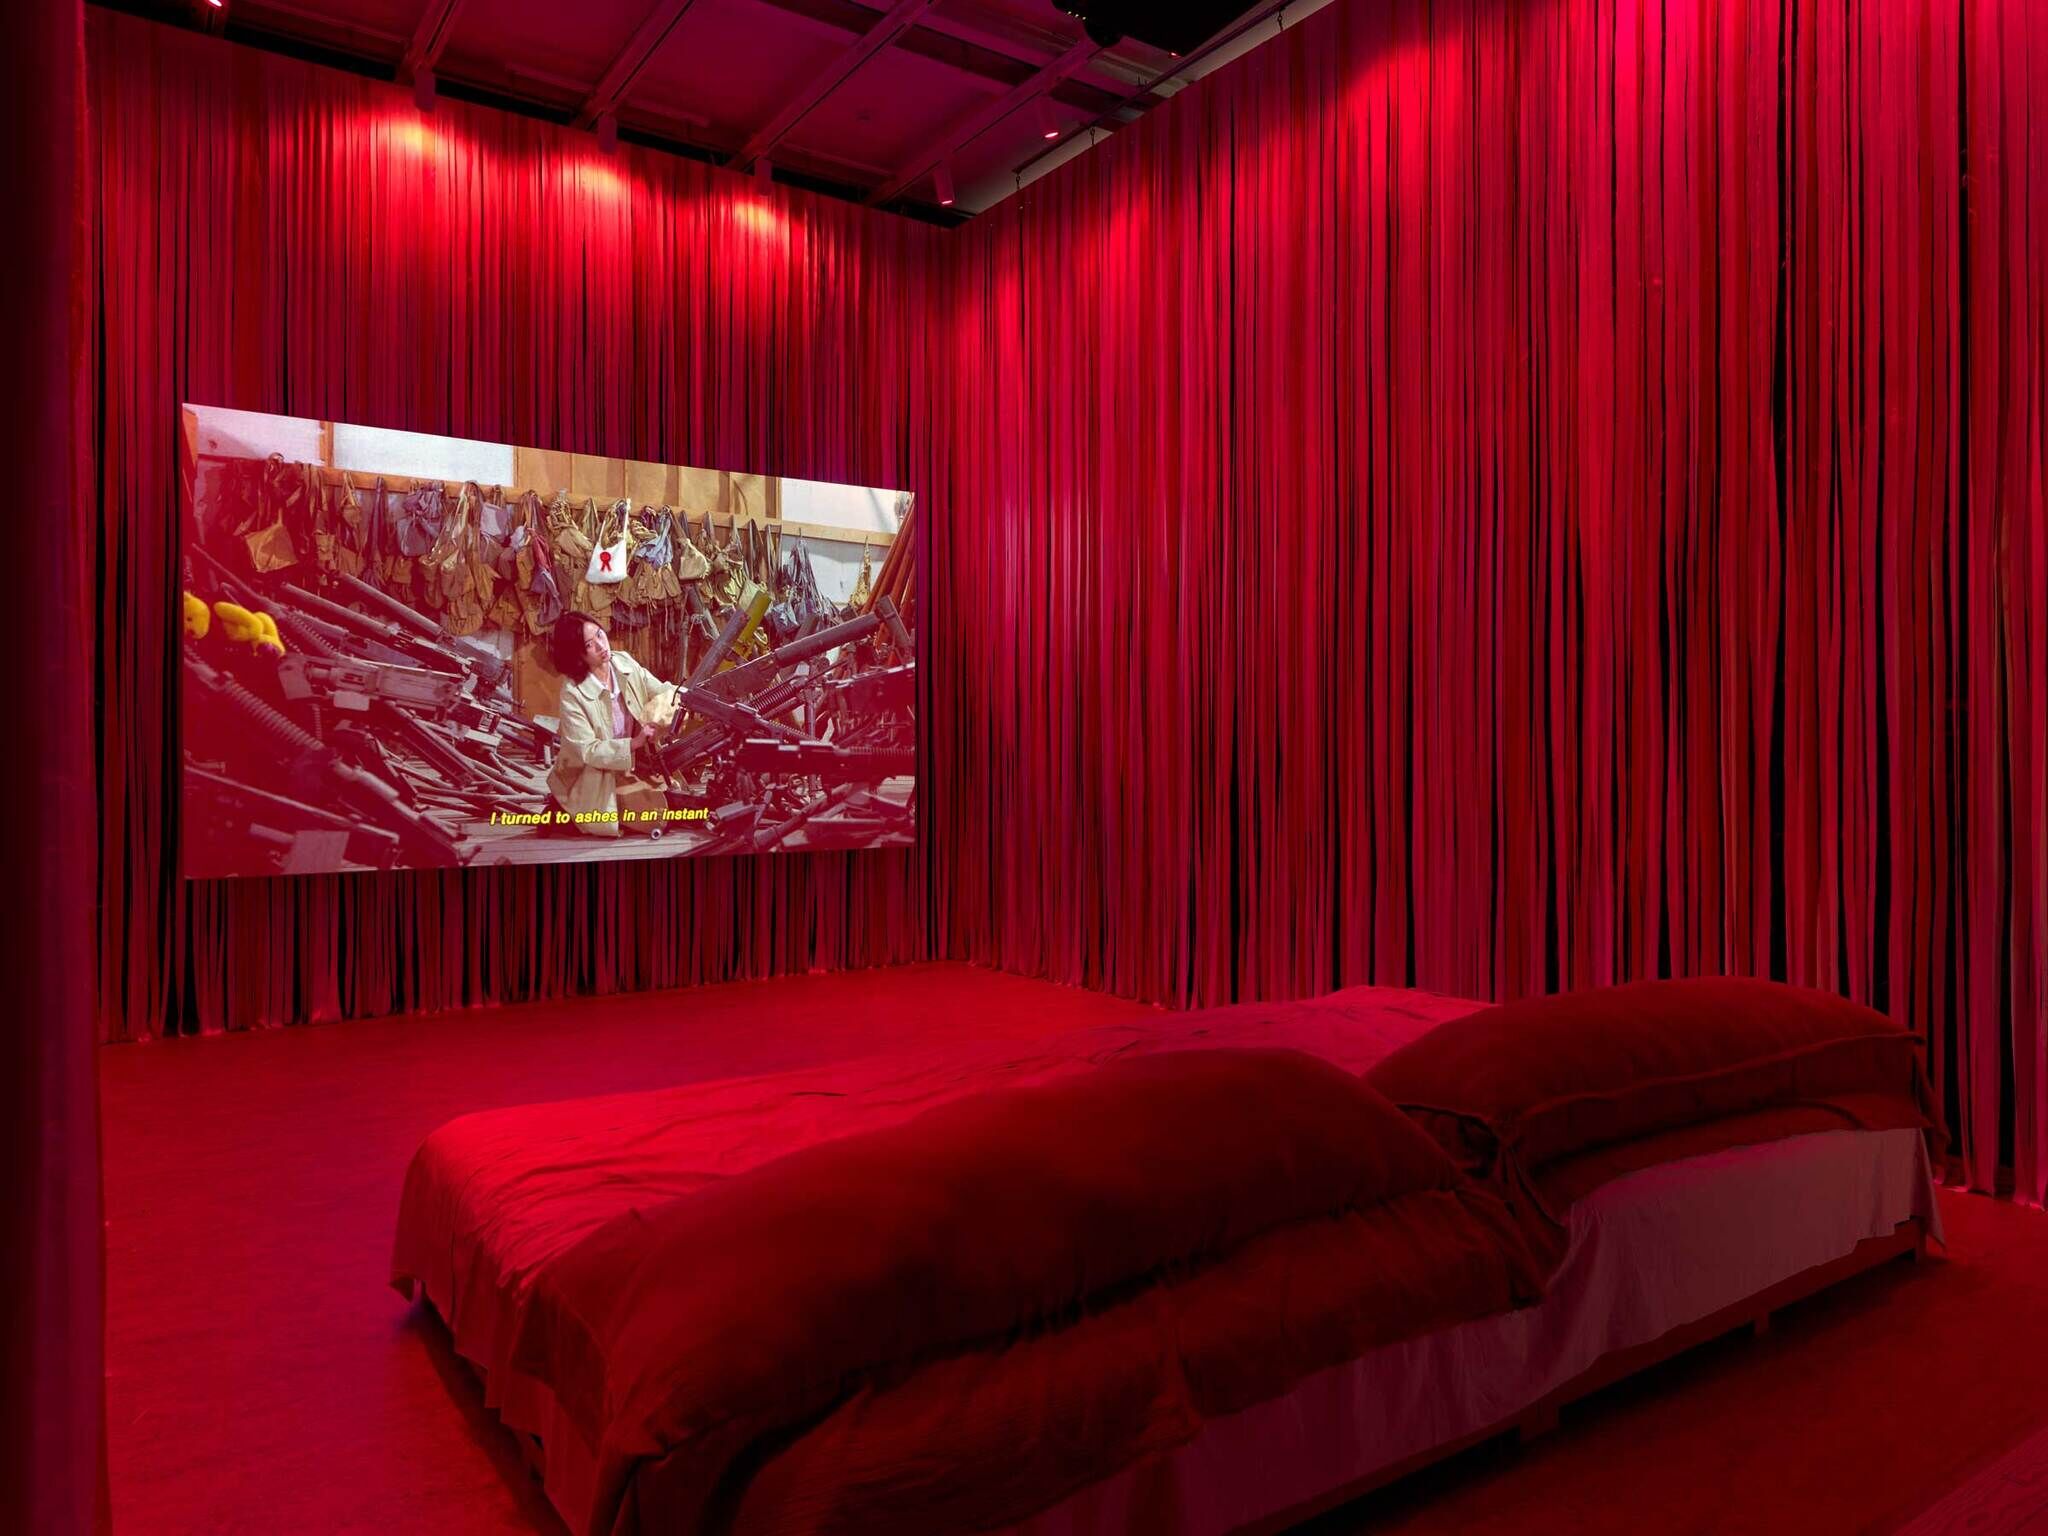 A red-themed room with curtains, a large bed, and a screen displaying a dramatic scene with the text "Turned to ashes in an instant."